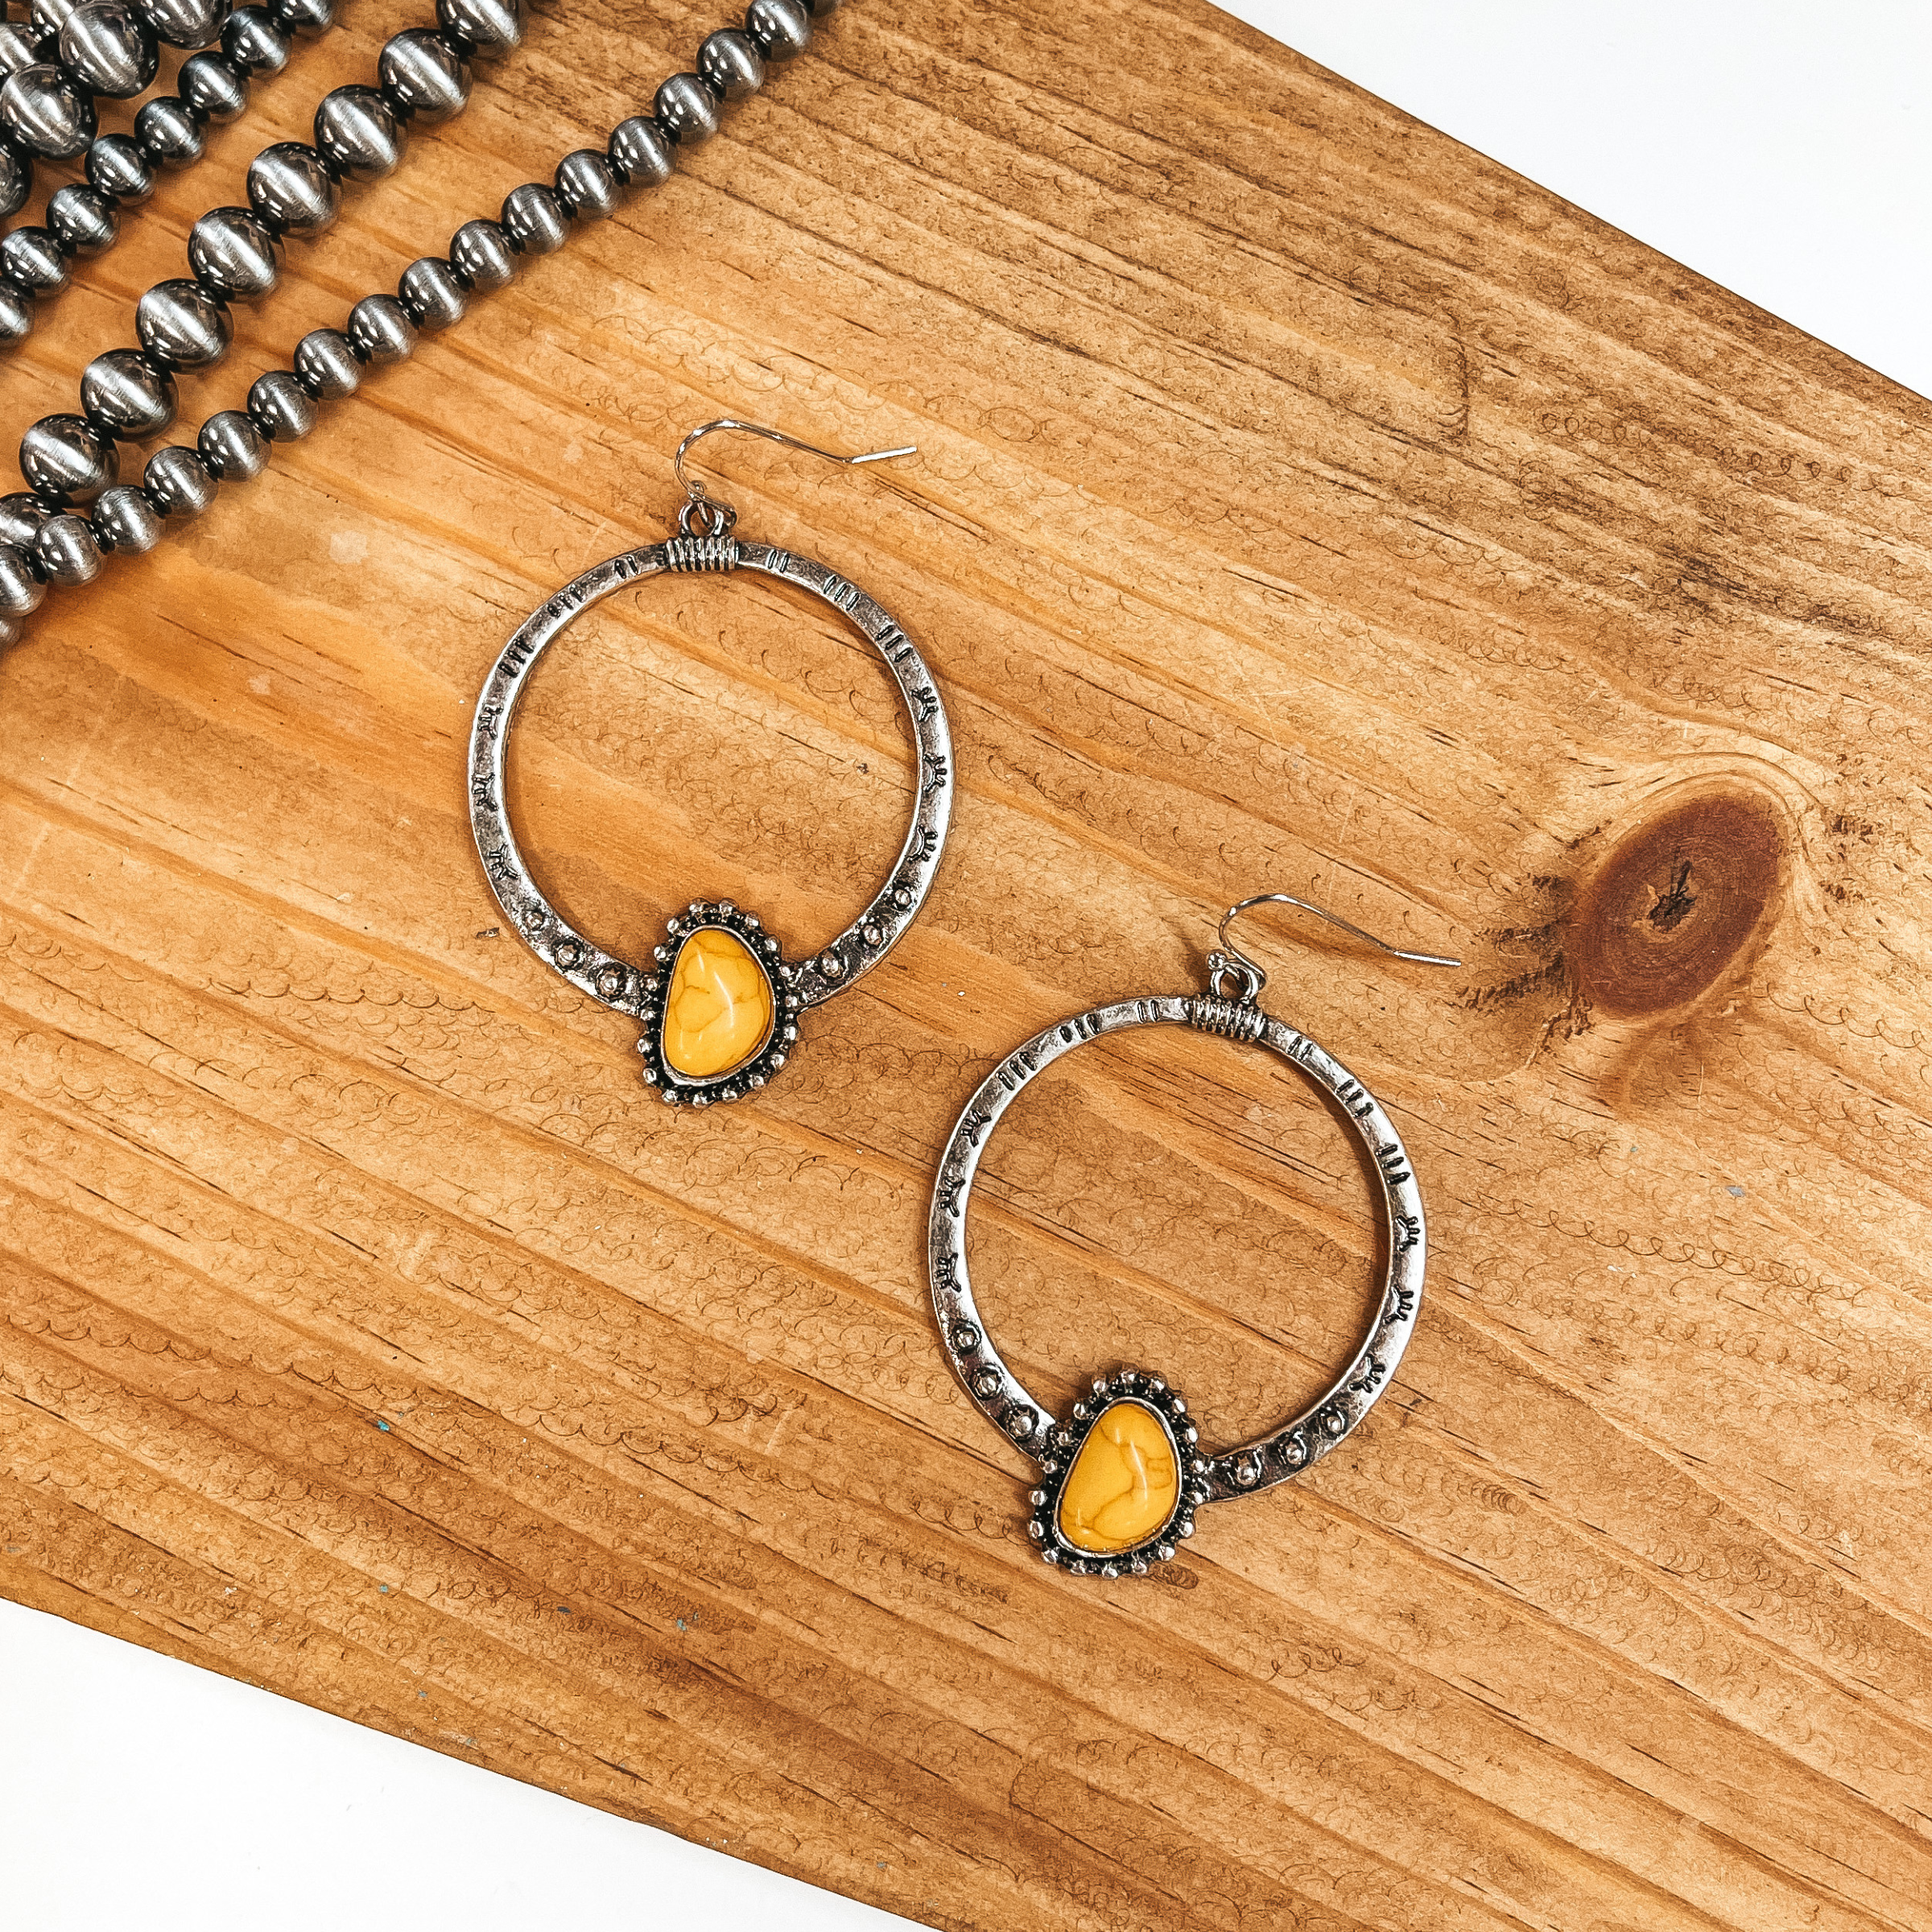 These are silver fish hook earrings with a circle  drop. The hoop has western engravings and a semi  circle stone in mustard yellow with silver  details around. These earrings are taken on a brown  block and faux navajo pearls as decor in the side.